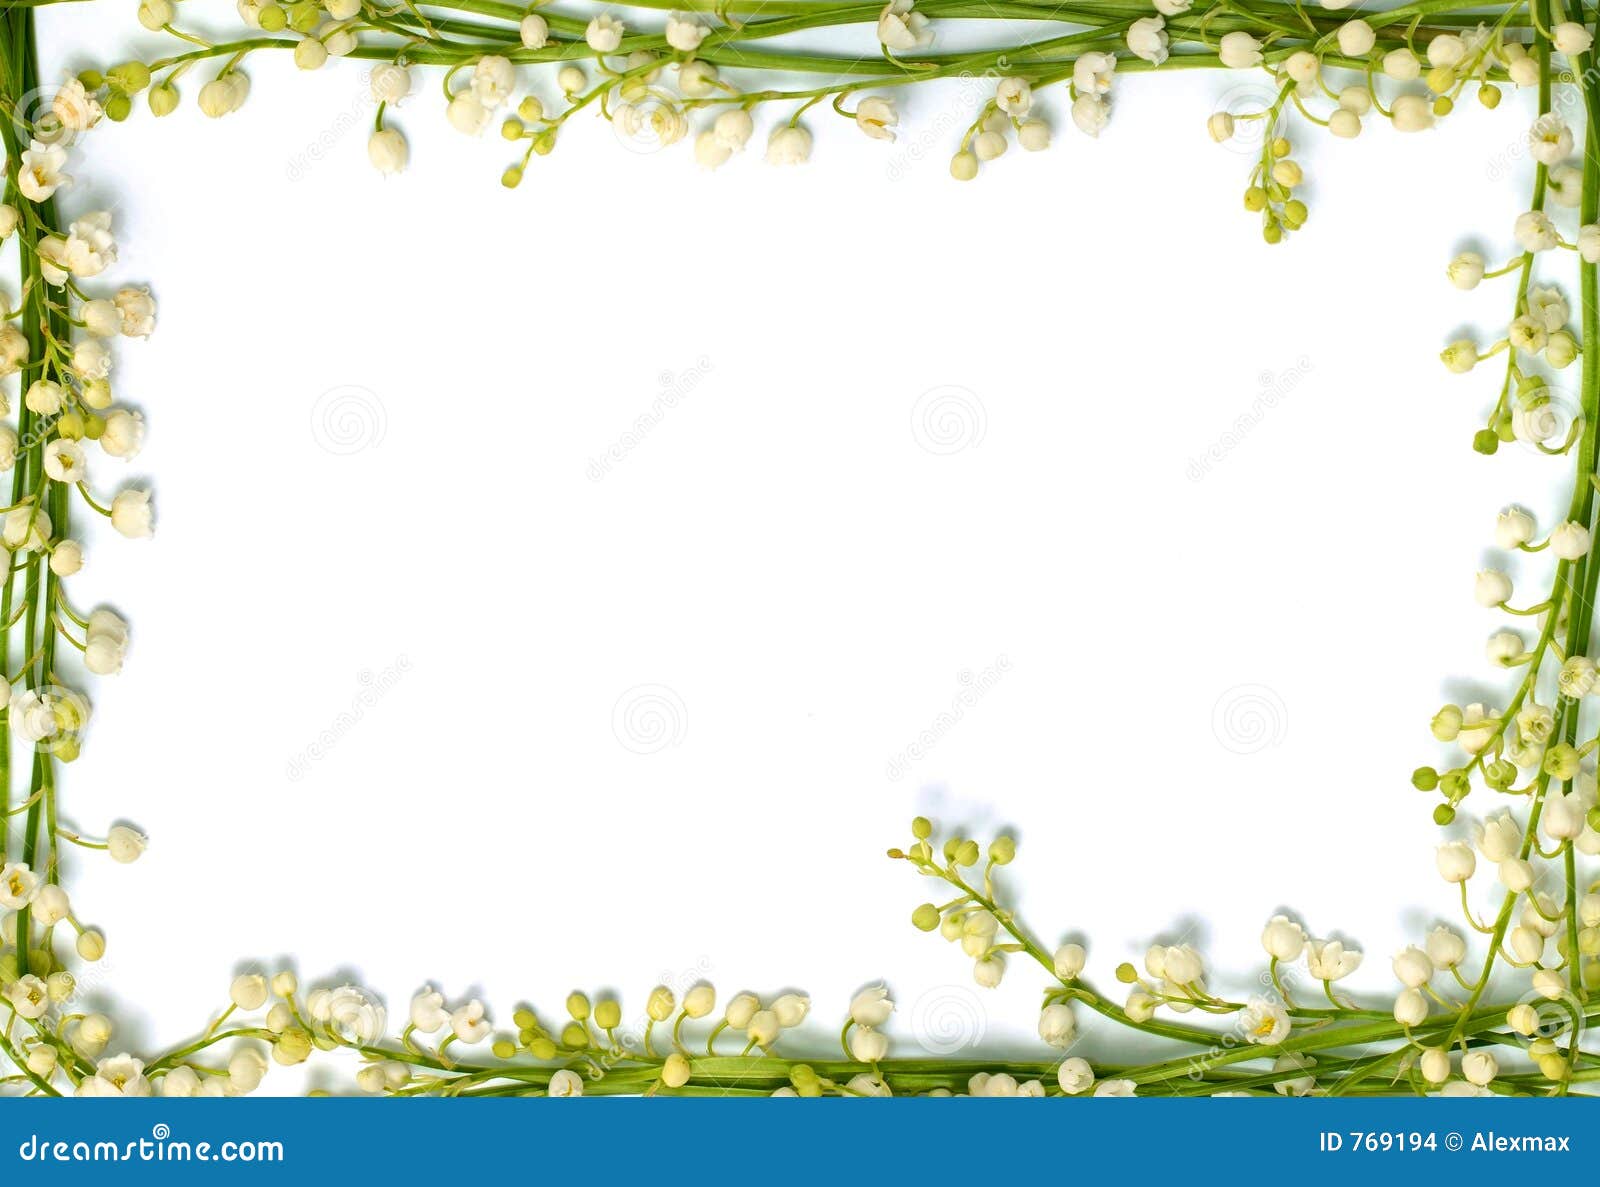 Lily Of The Valley Flowers On Paper Frame Border Isolated Horizo Stock